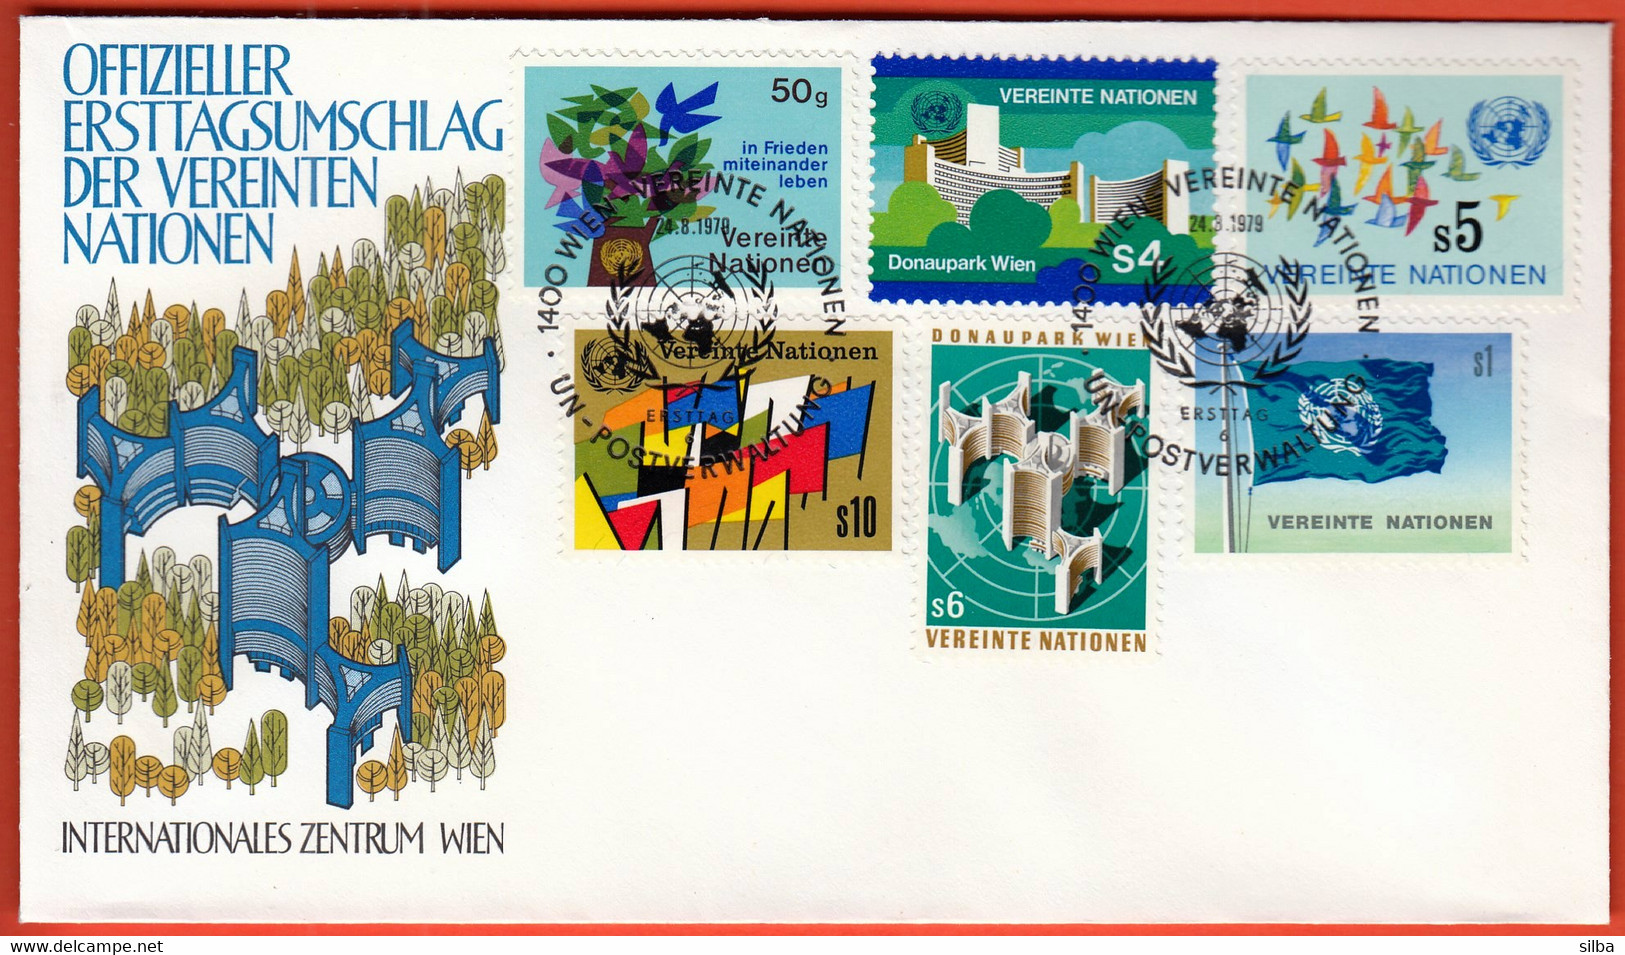 United Nations Vienna Wien 1979 / Birds, Flags, International Centre, Donaupark, Live In Peace, Coat Of Arms / FDC - Briefe U. Dokumente